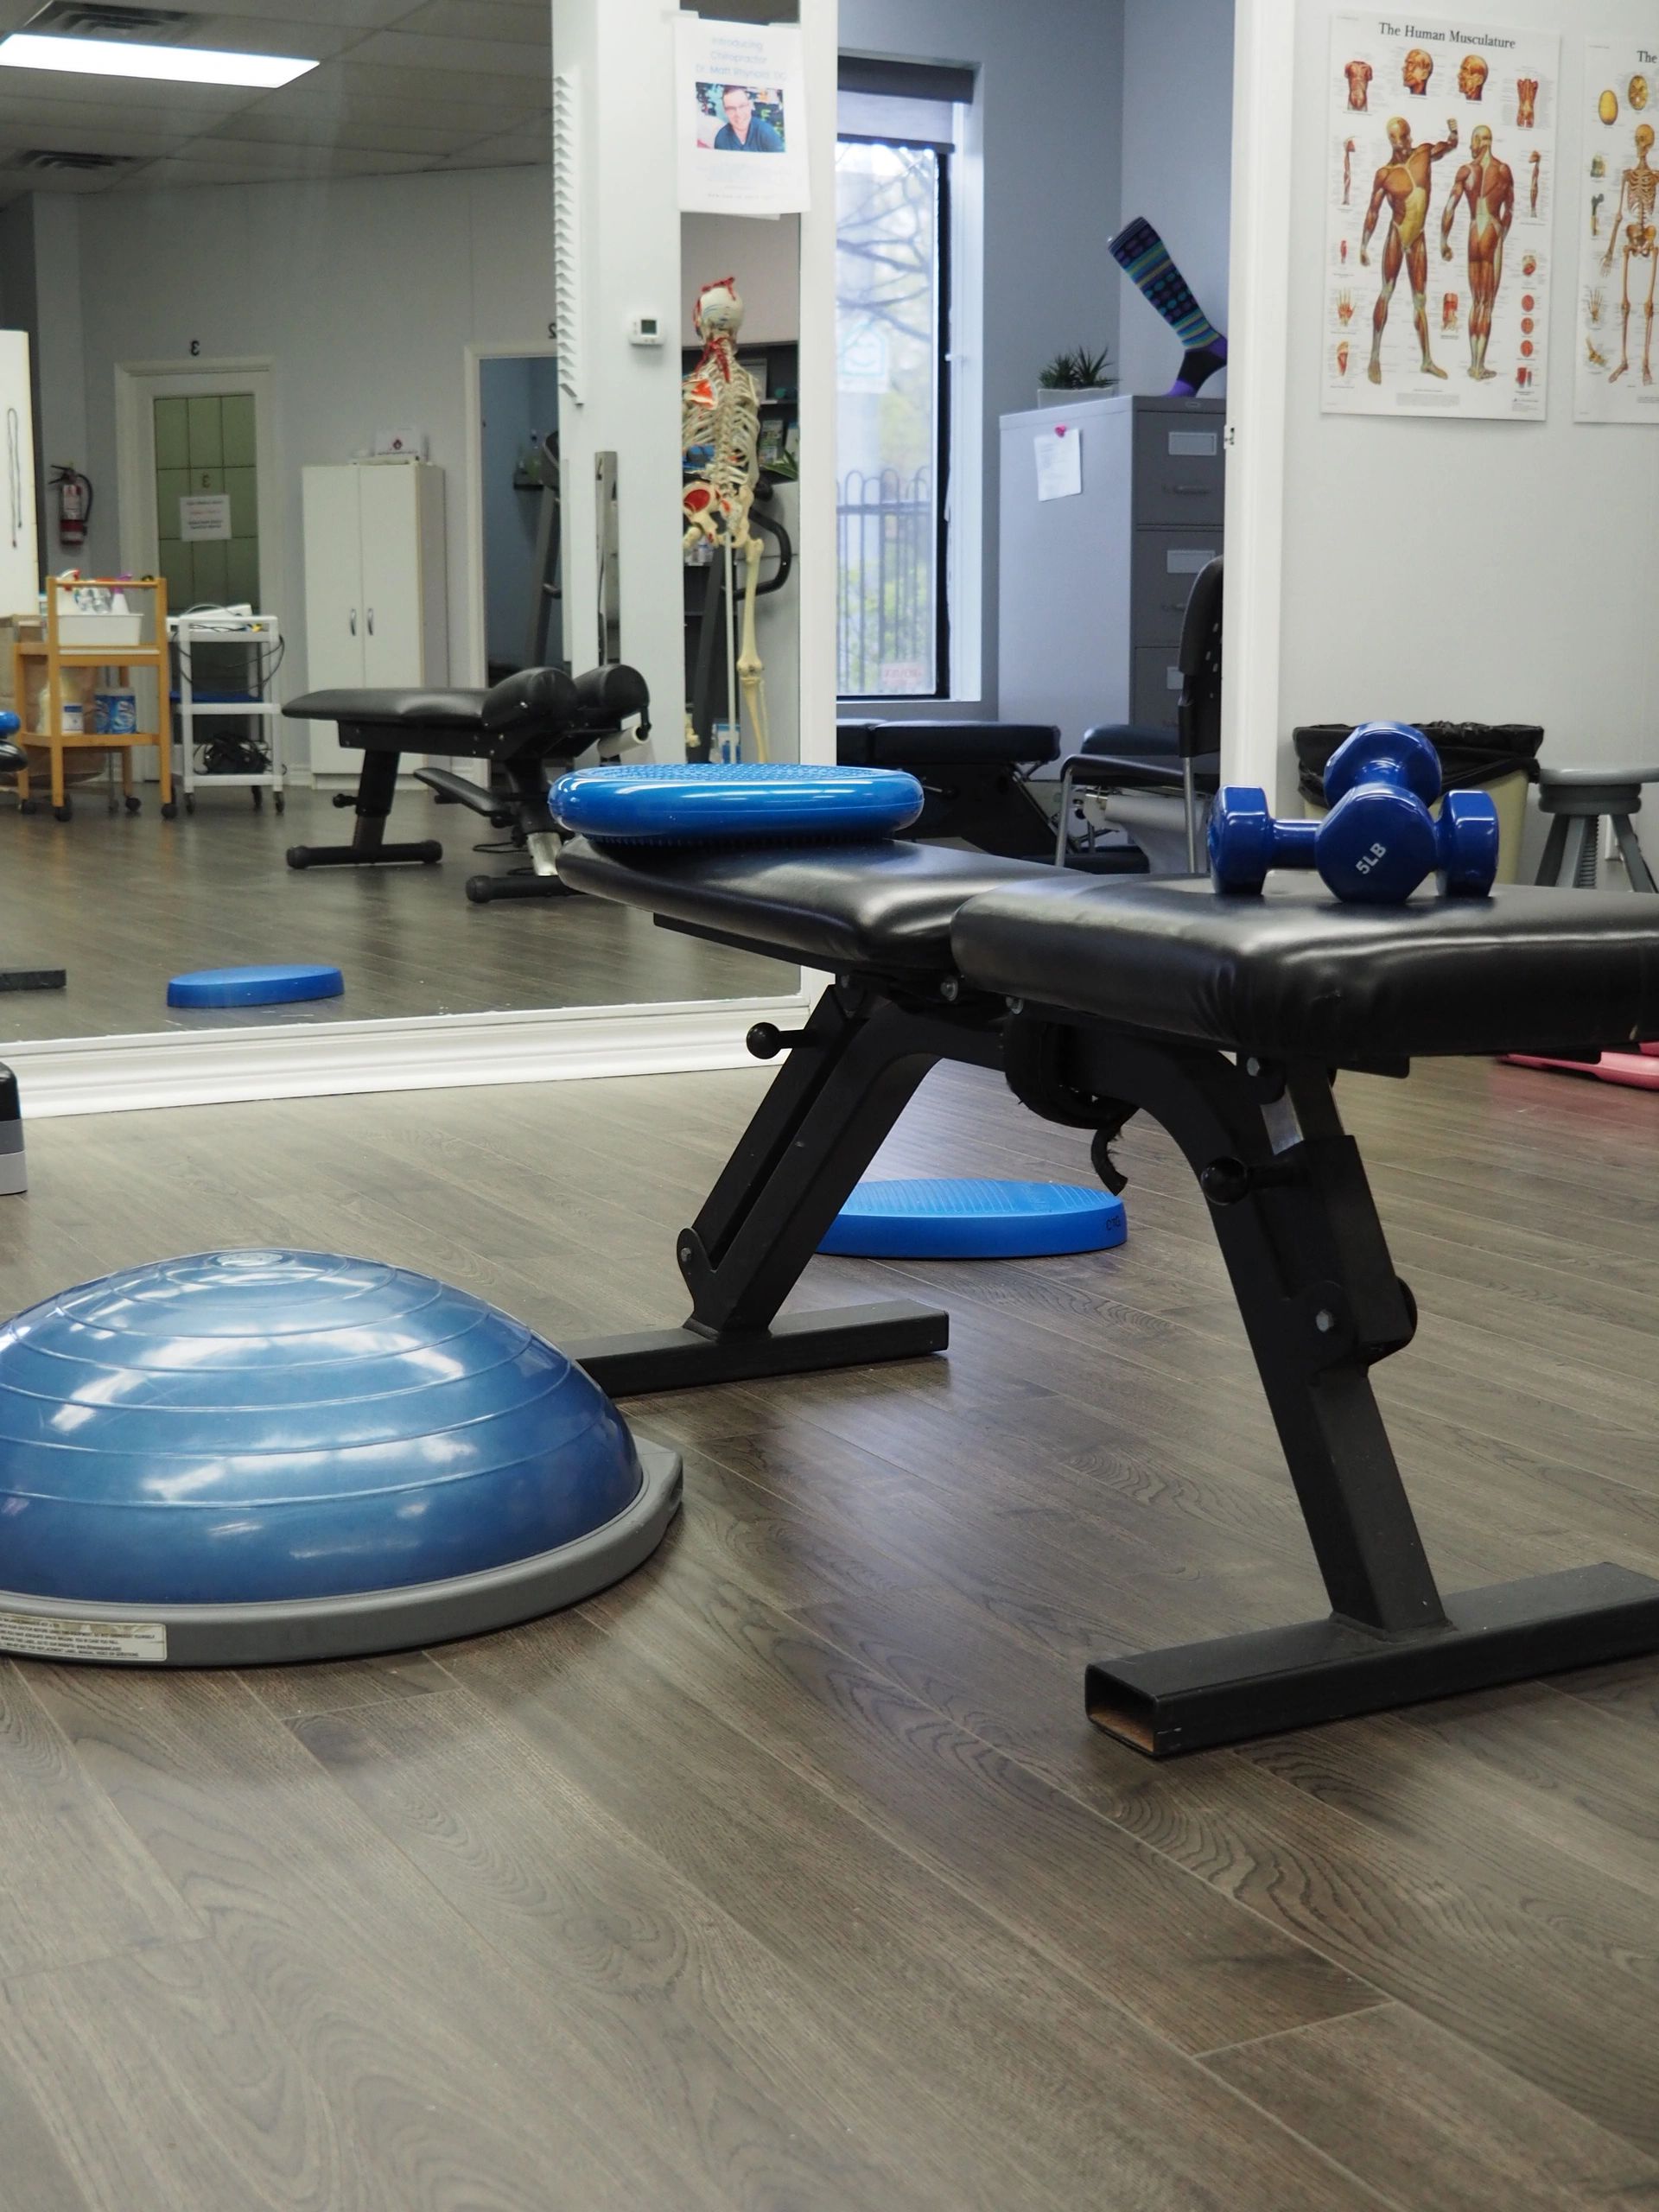 Gym at Clarkson with skeleton for education, posters, bench, weights, balance pads, BOSU. 
